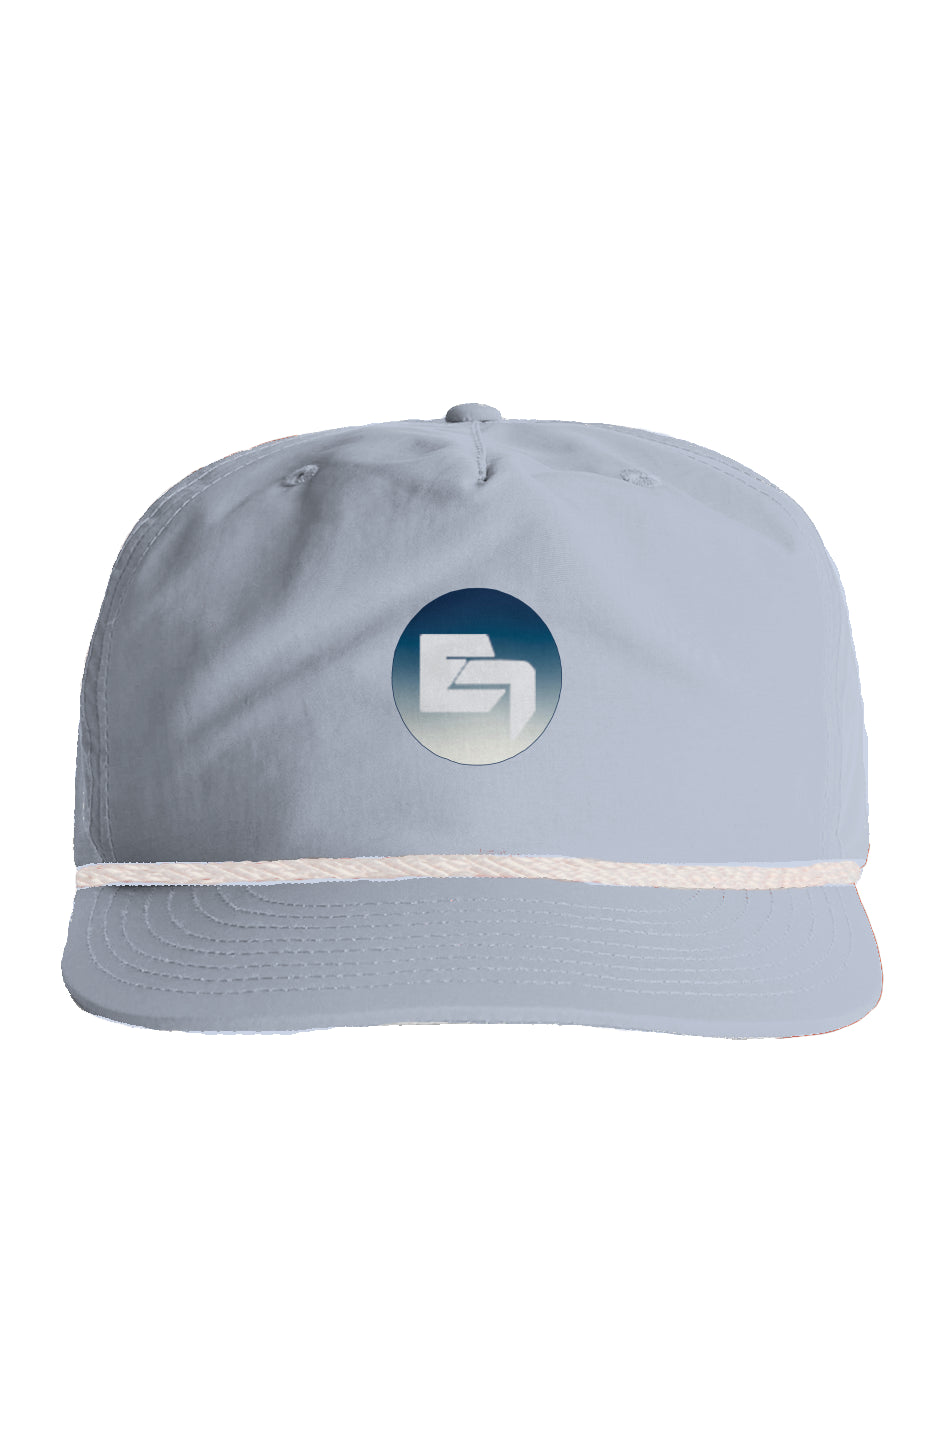 Elevated surf rope hat